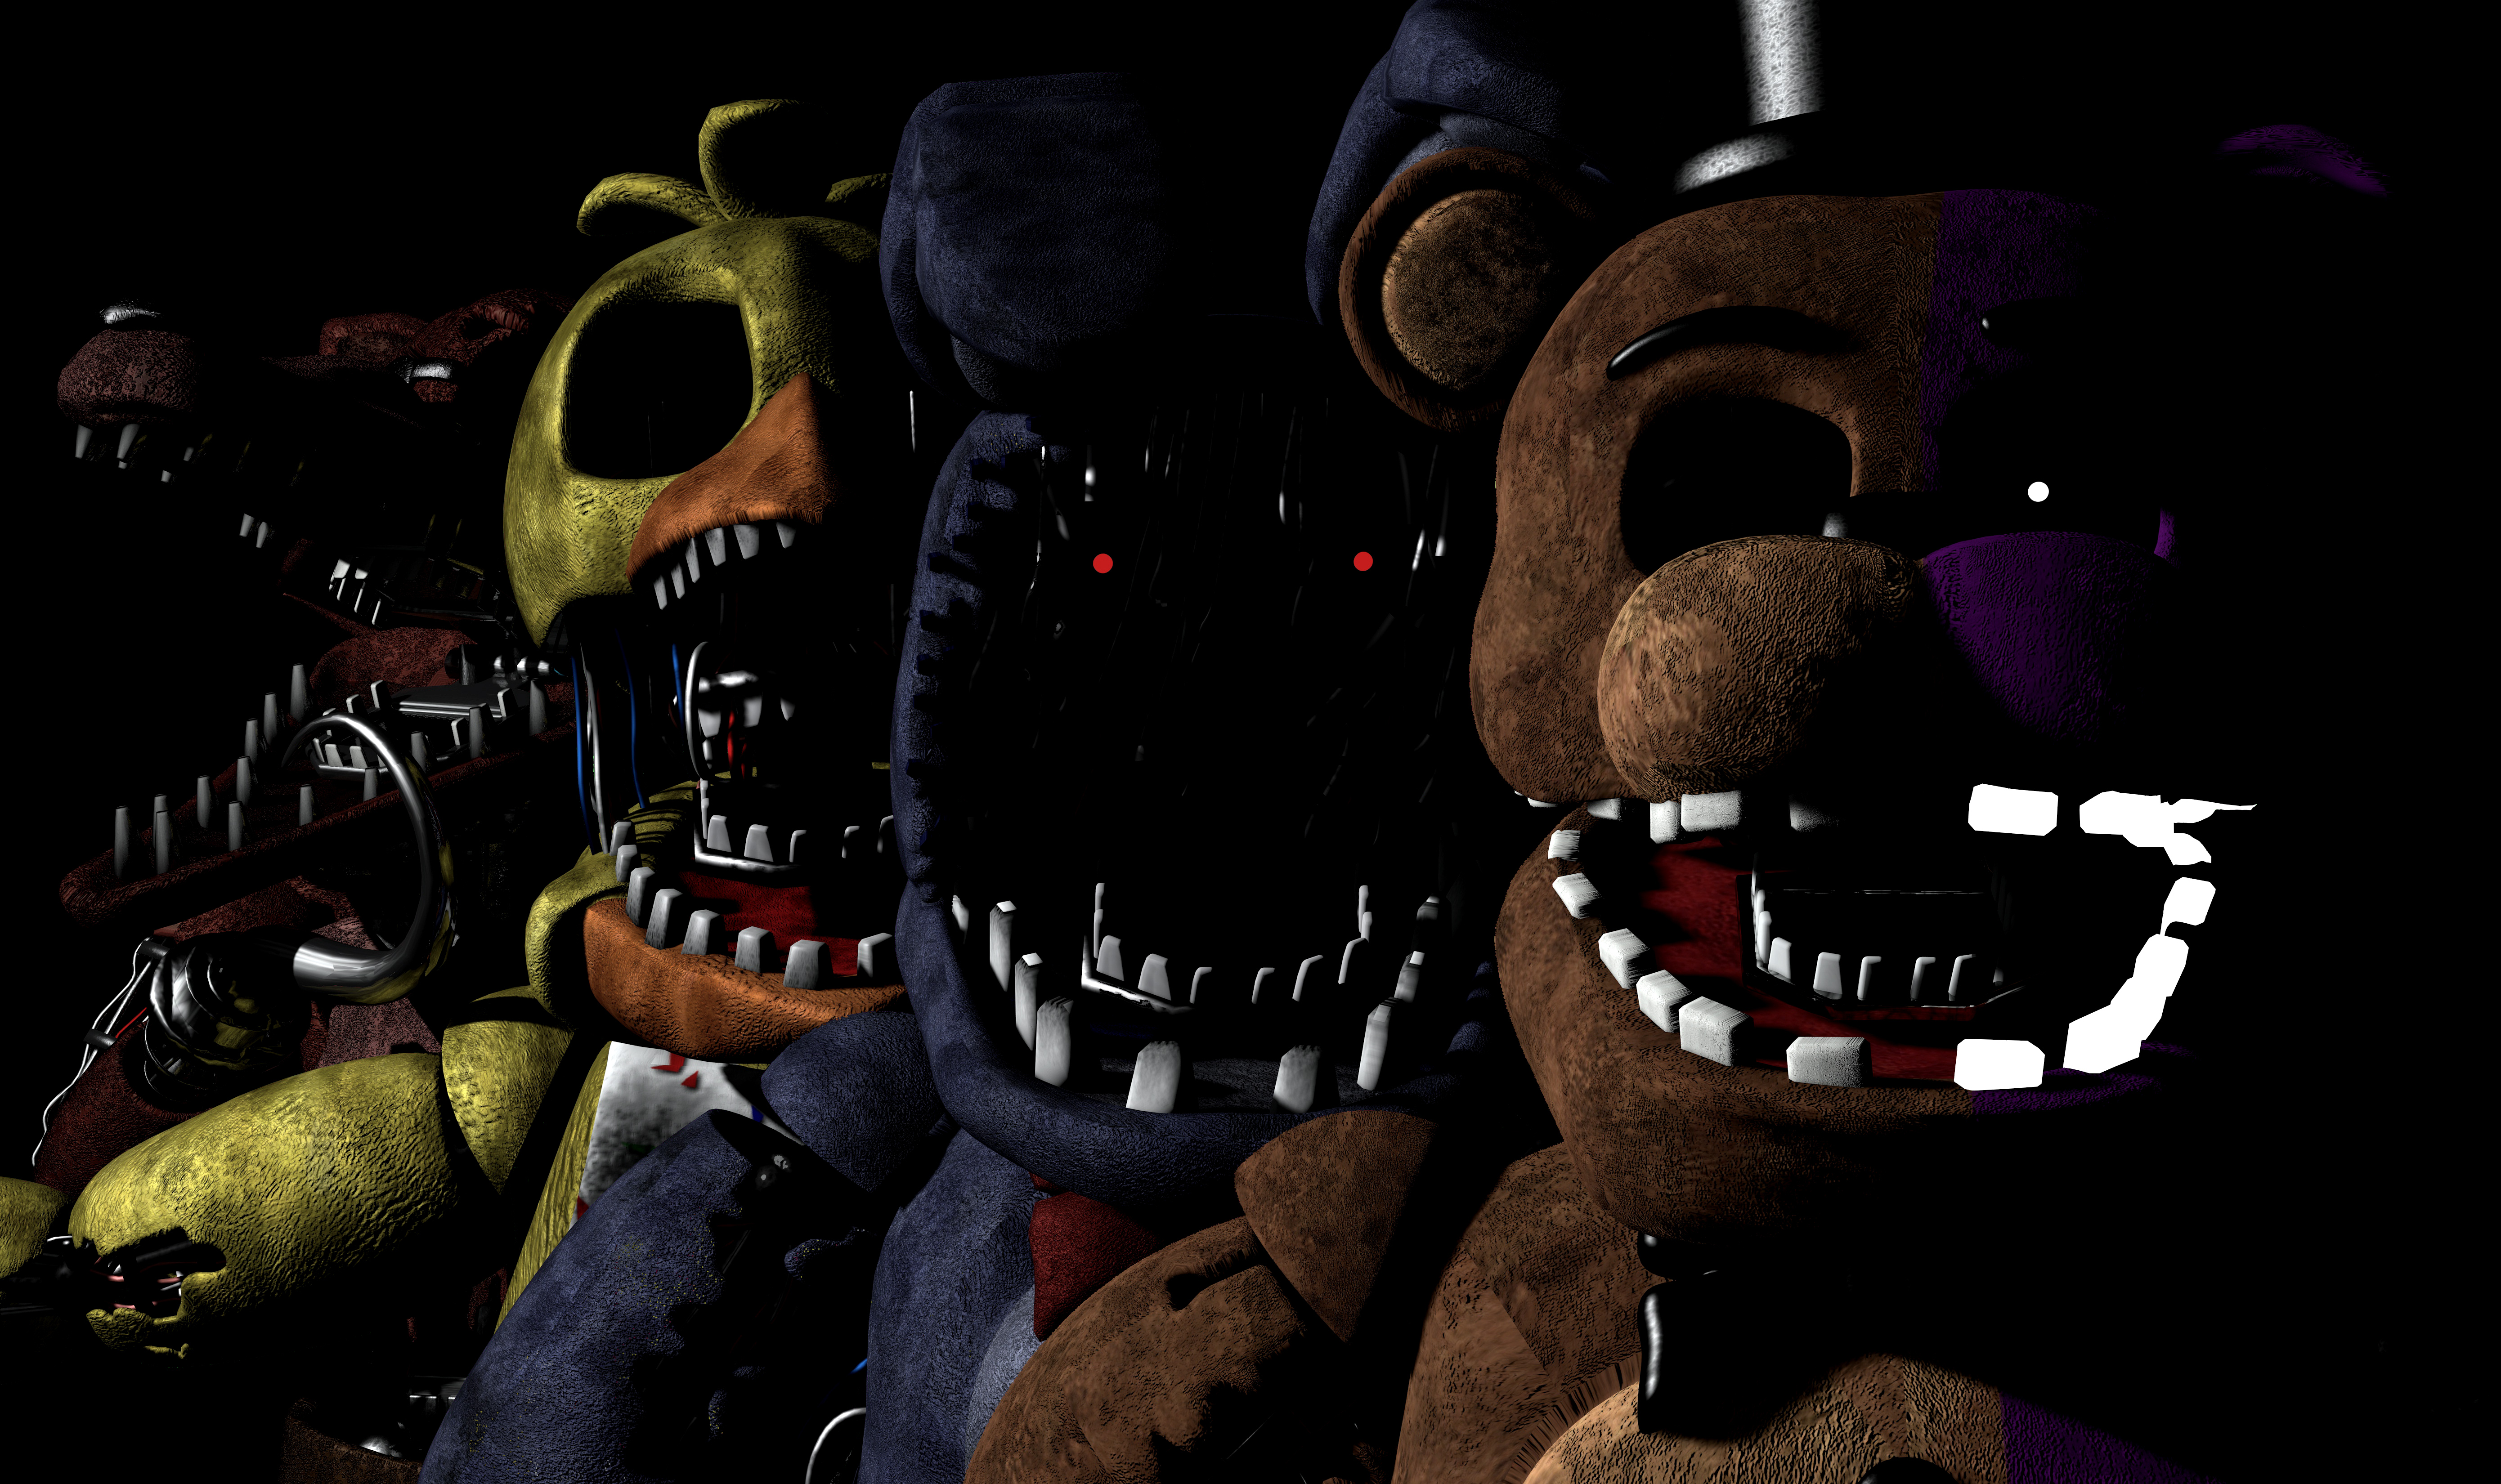 Fnaf 2 withered animatronics by UnTipObisnuit